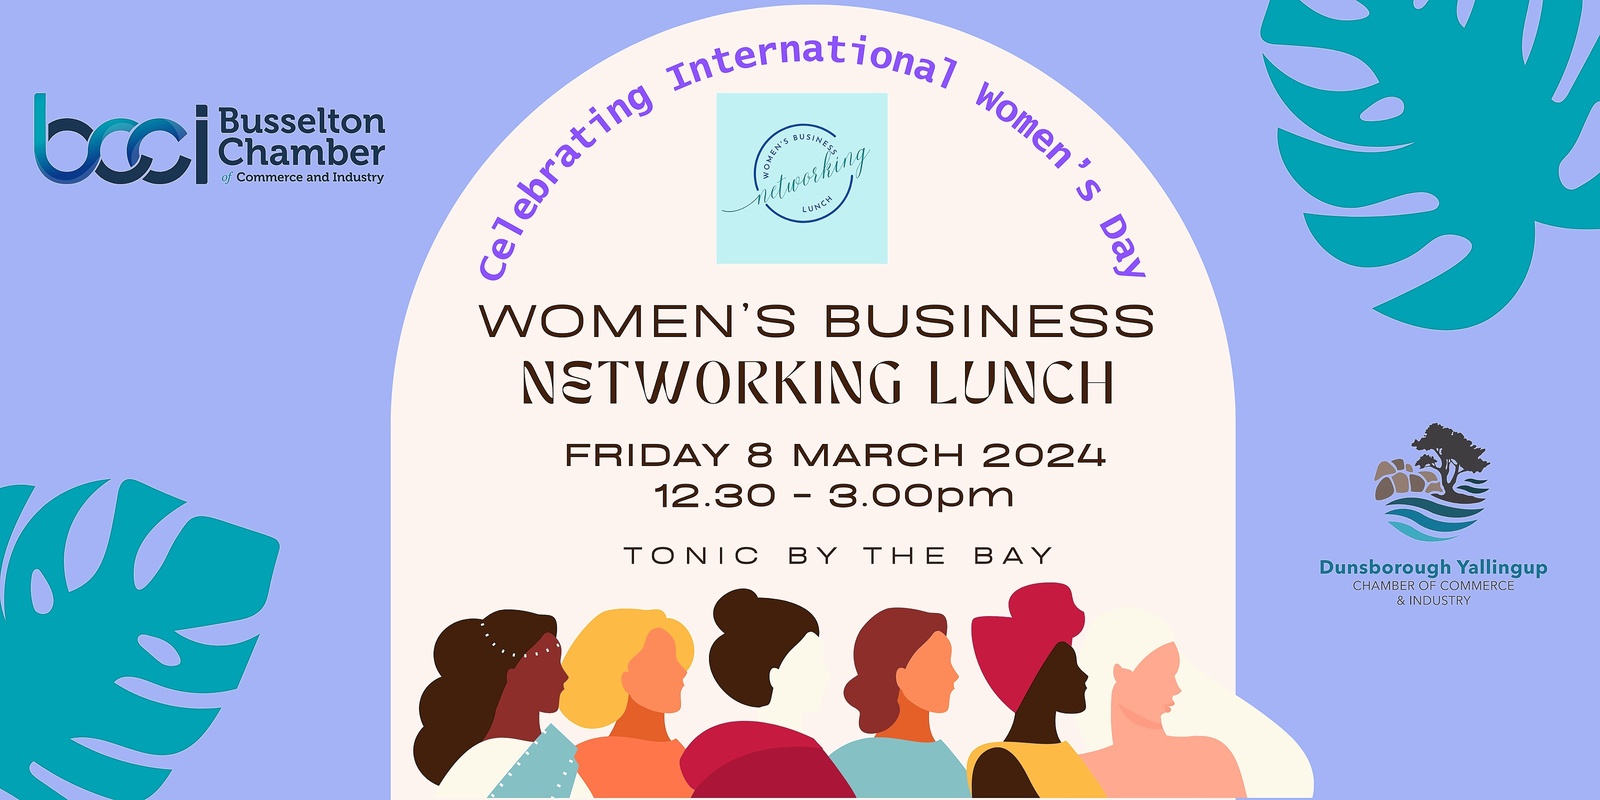 Banner image for WOMEN'S BUSINESS NETWORKING LUNCH for International Women's Day